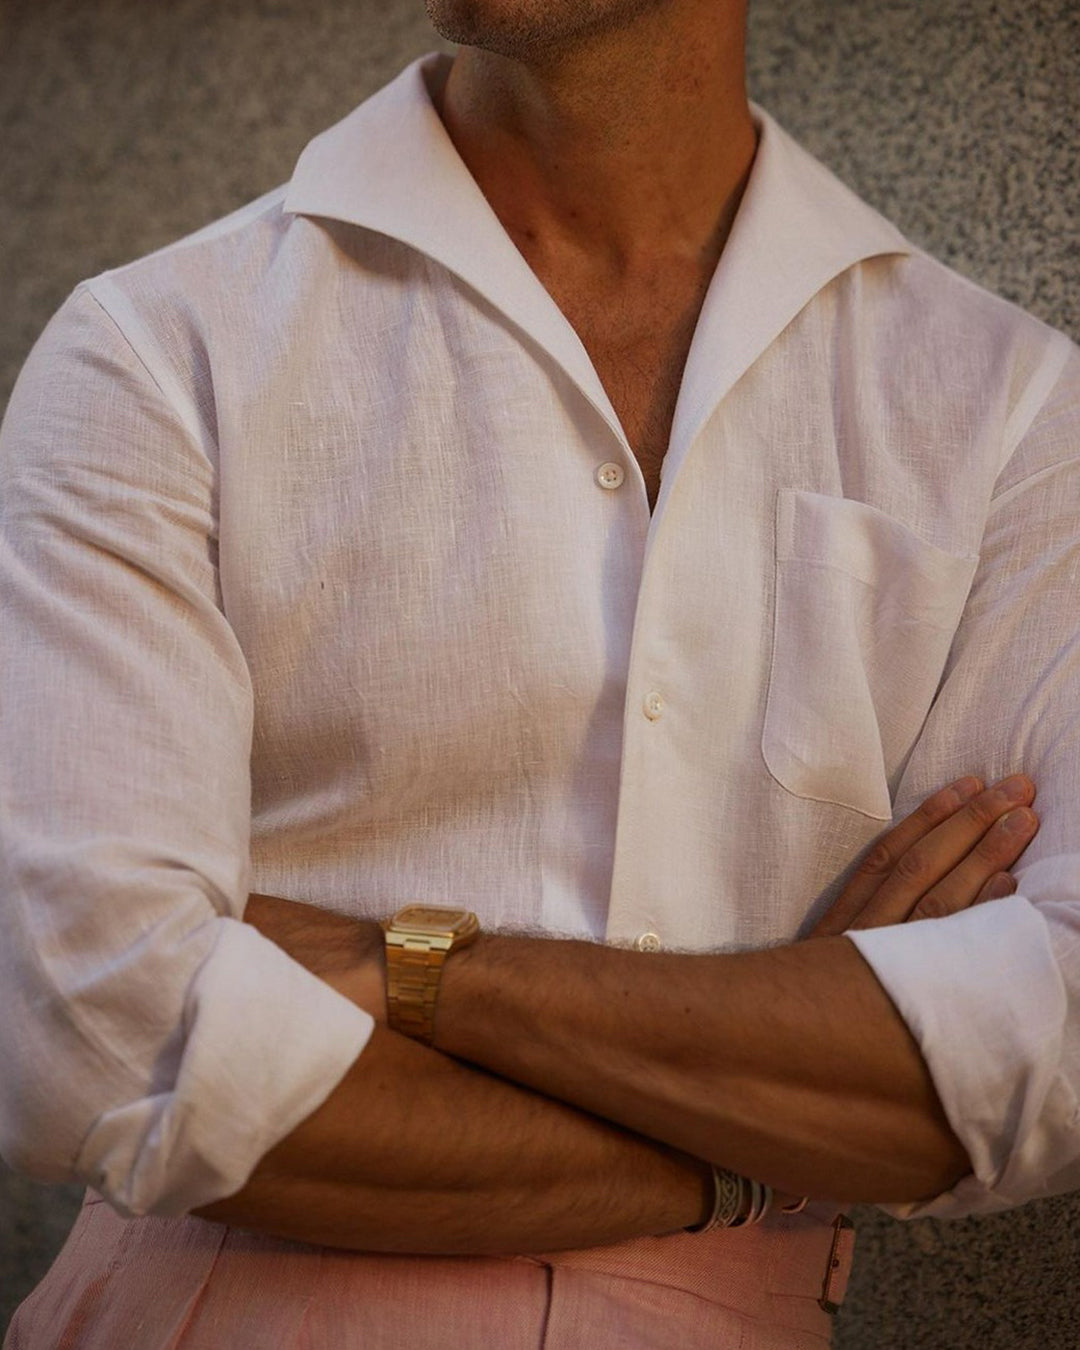 Summer Shirt in Crisp White Linen with one piece collar placket